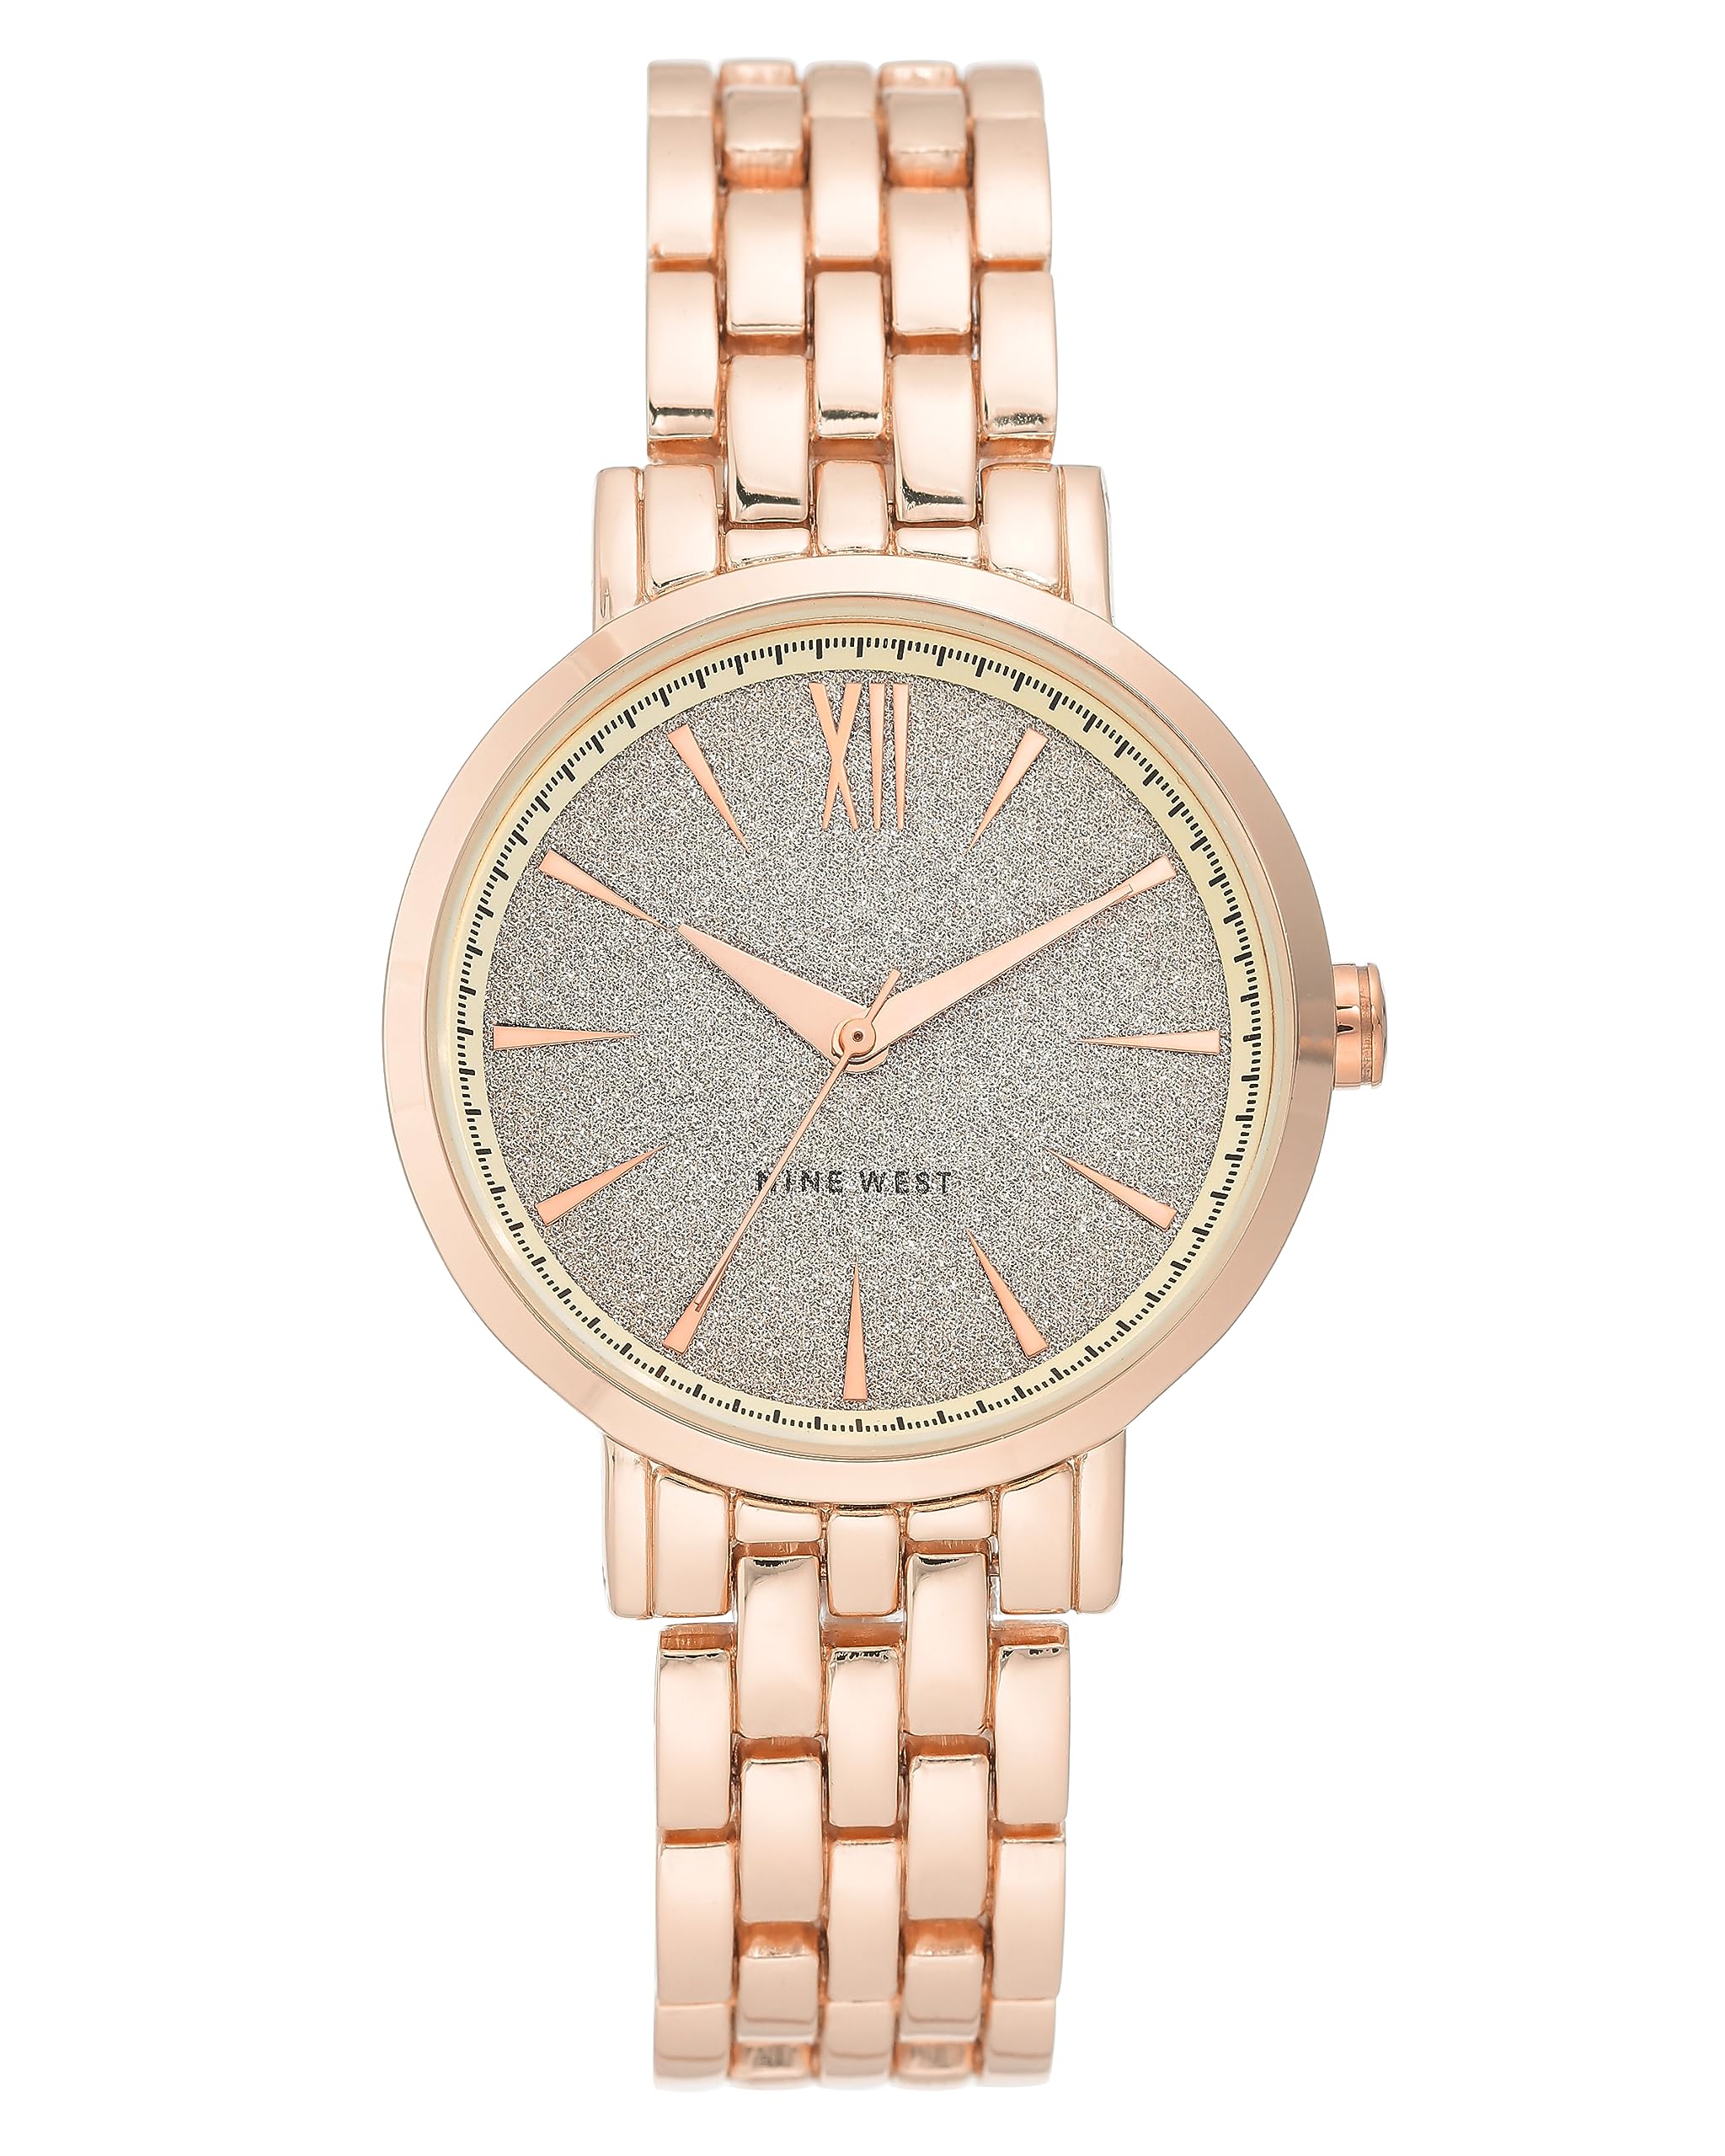 NINE WEST Women's Glitter Accented Dial Watch, NW/2402